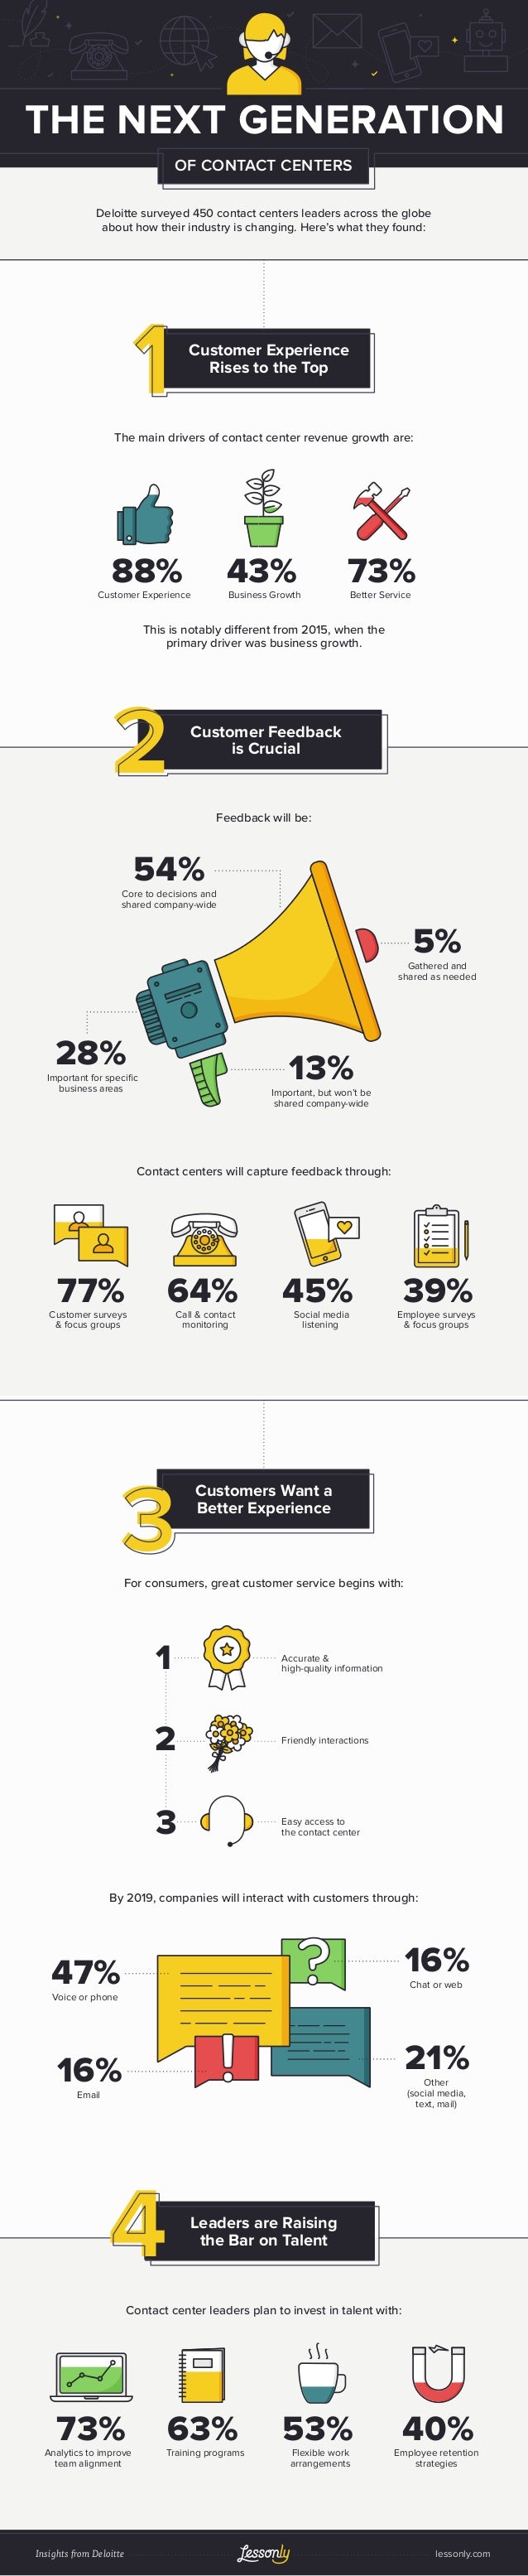 The Next Generation of Contact Centers [Infographic]